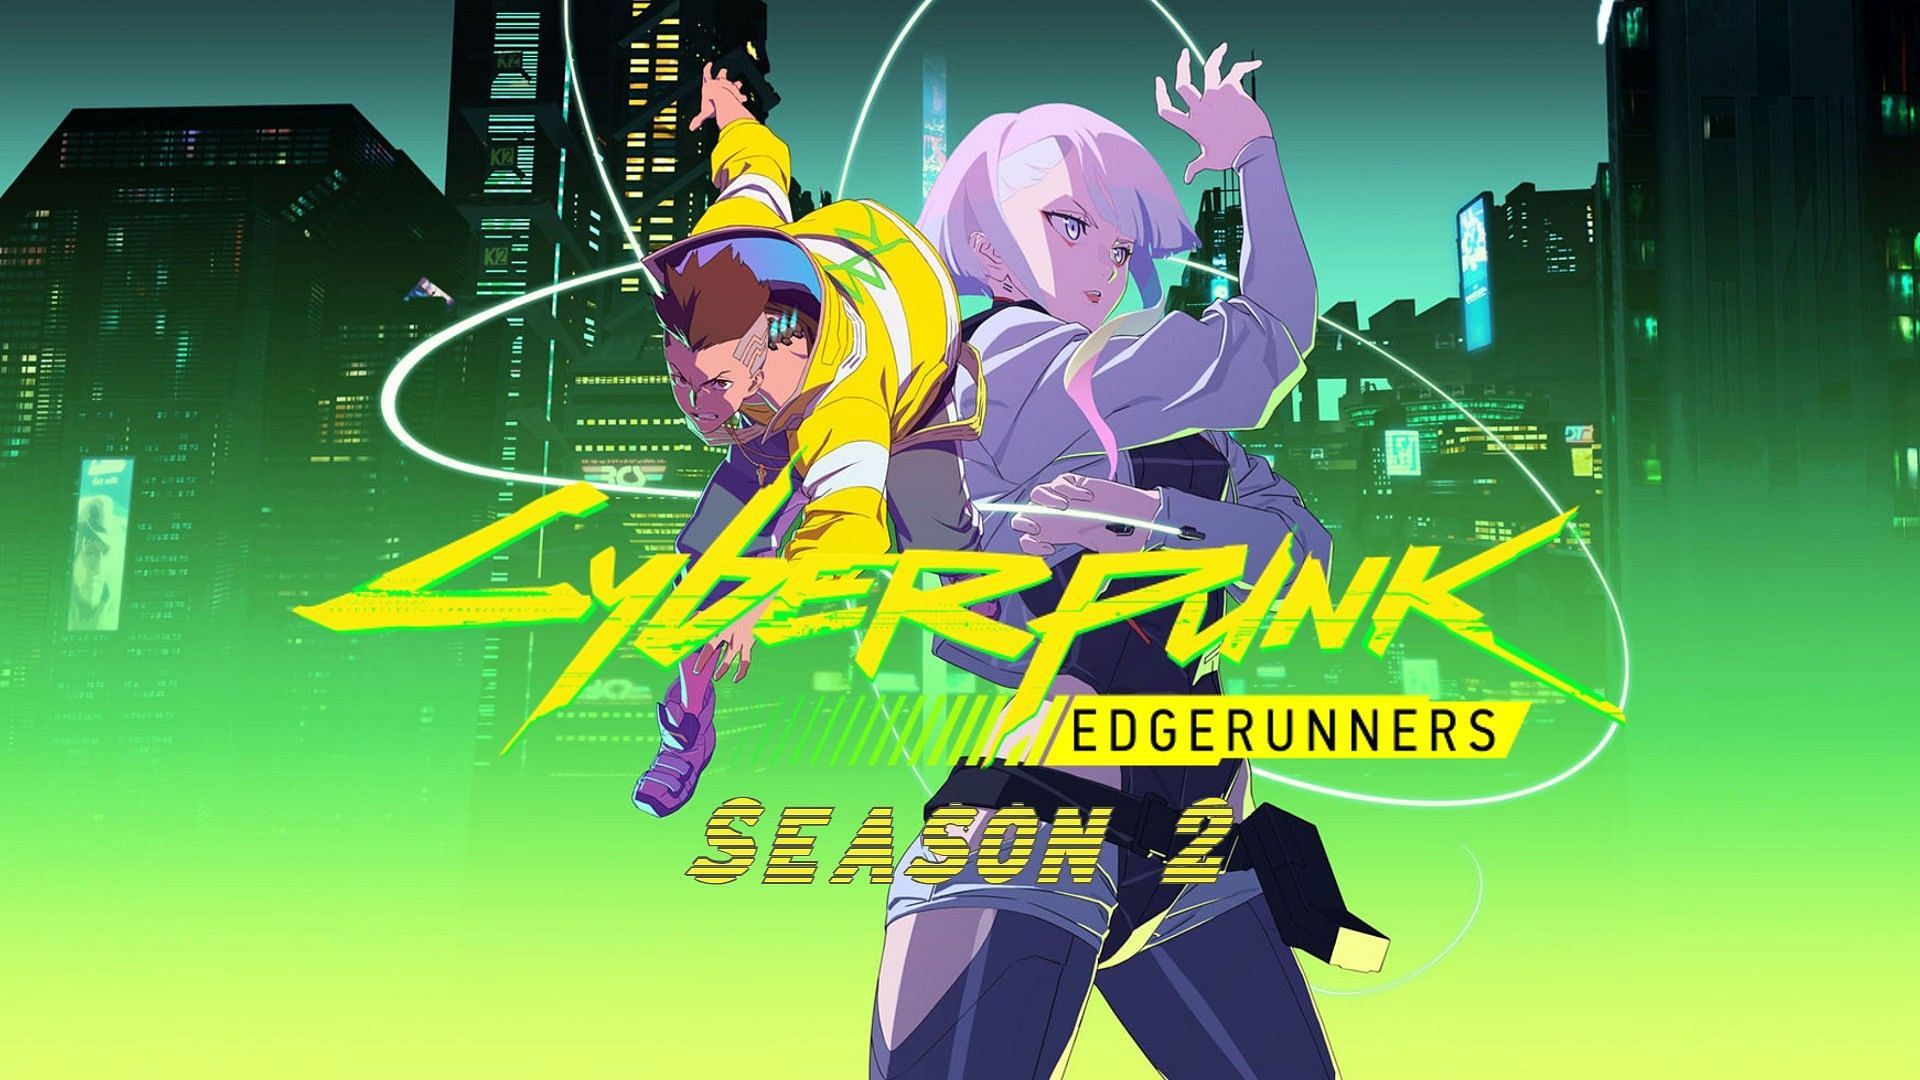 Cyberpunk Edgerunners: will there be a Season 2 for the anime